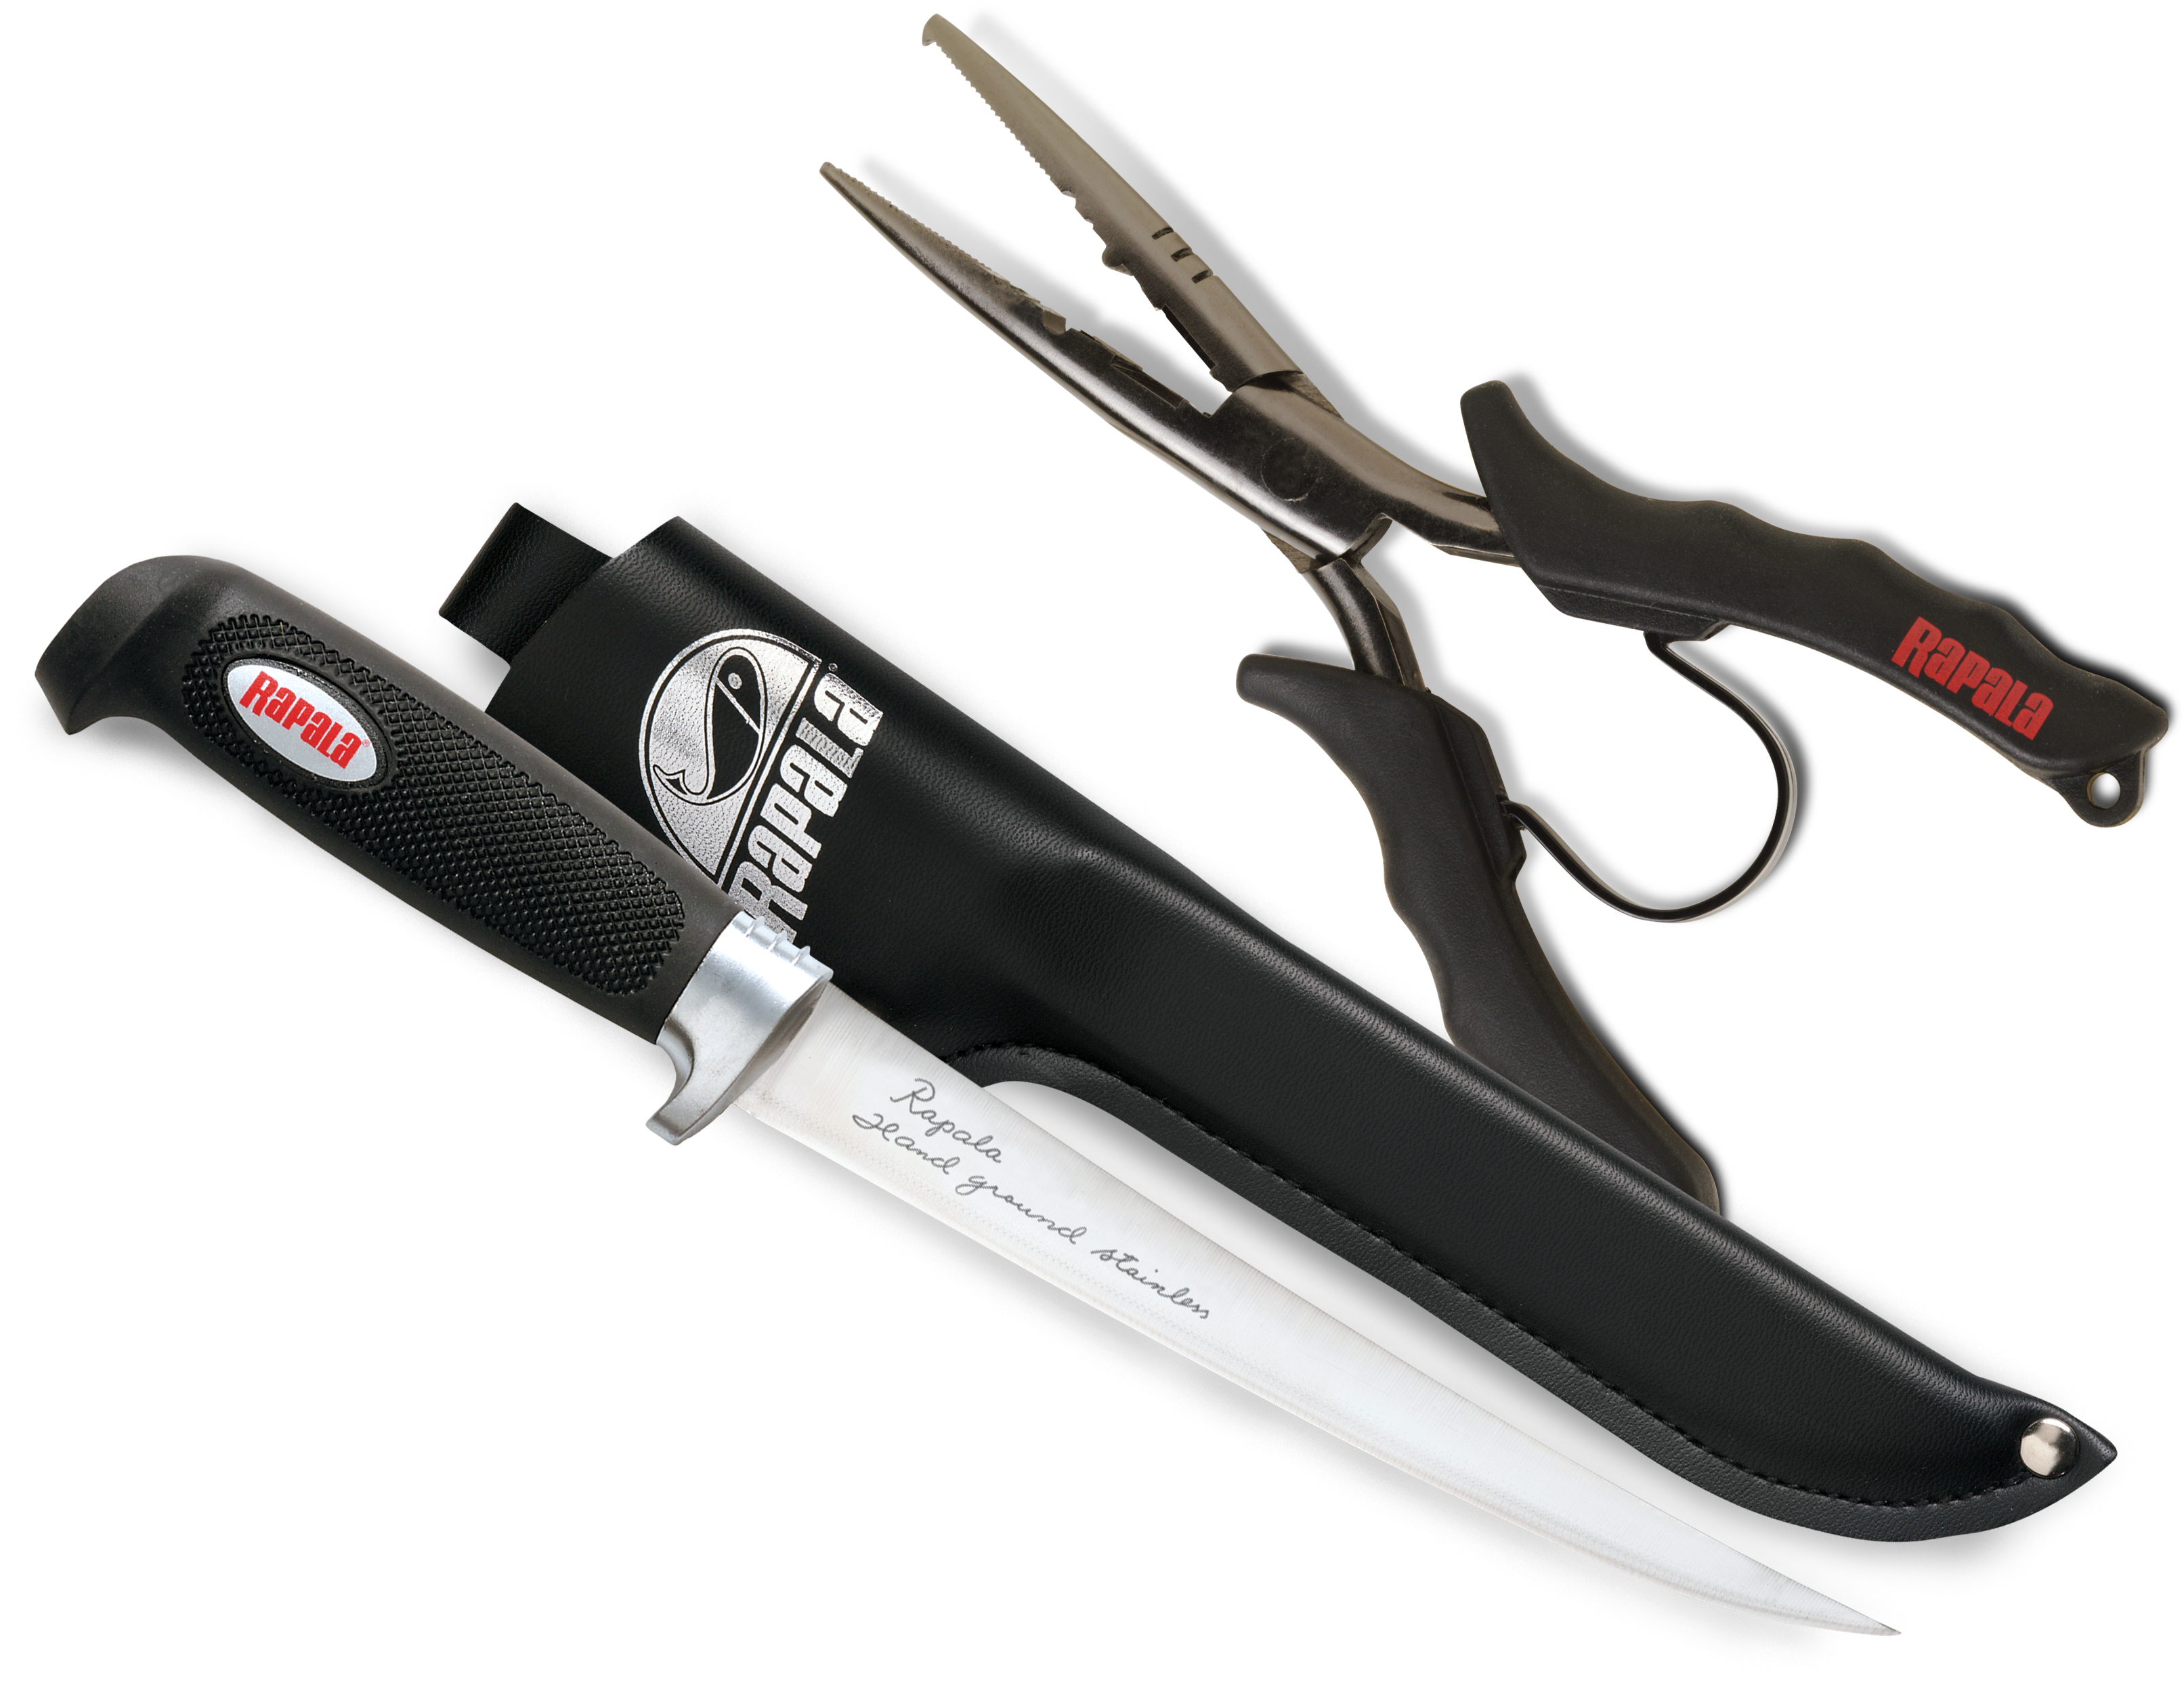 https://www.precisionfishing.com/img/products/022/022%2032573%20Rapala%20Fillet%20Tool%20Combo%20Pliers%20and%20Fillet%20Knife-Sheath.jpg